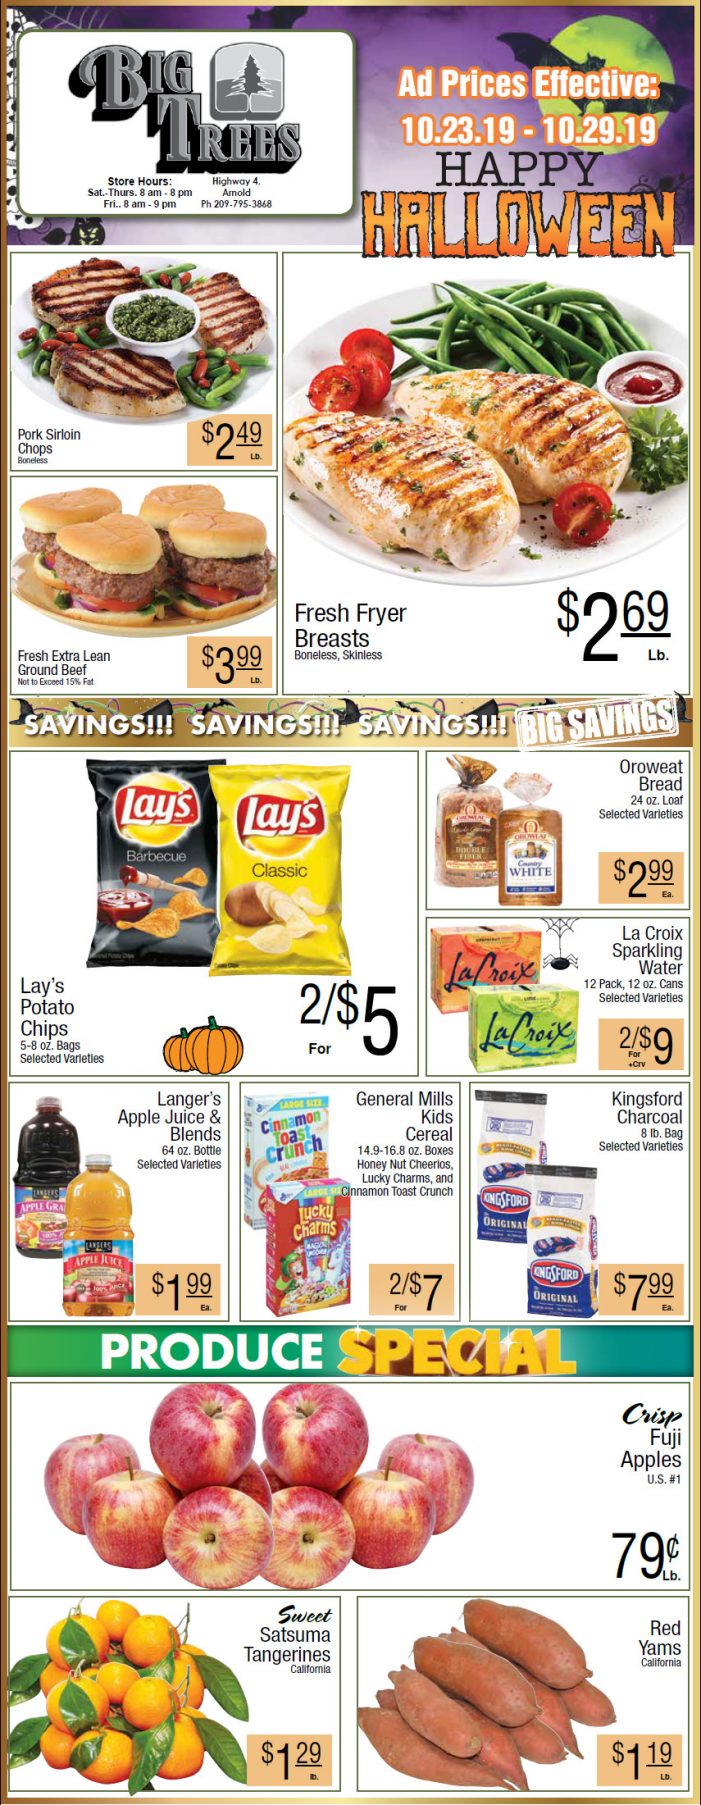 Big Trees Market Weekly Ad & Grocery Specials Through October 29th